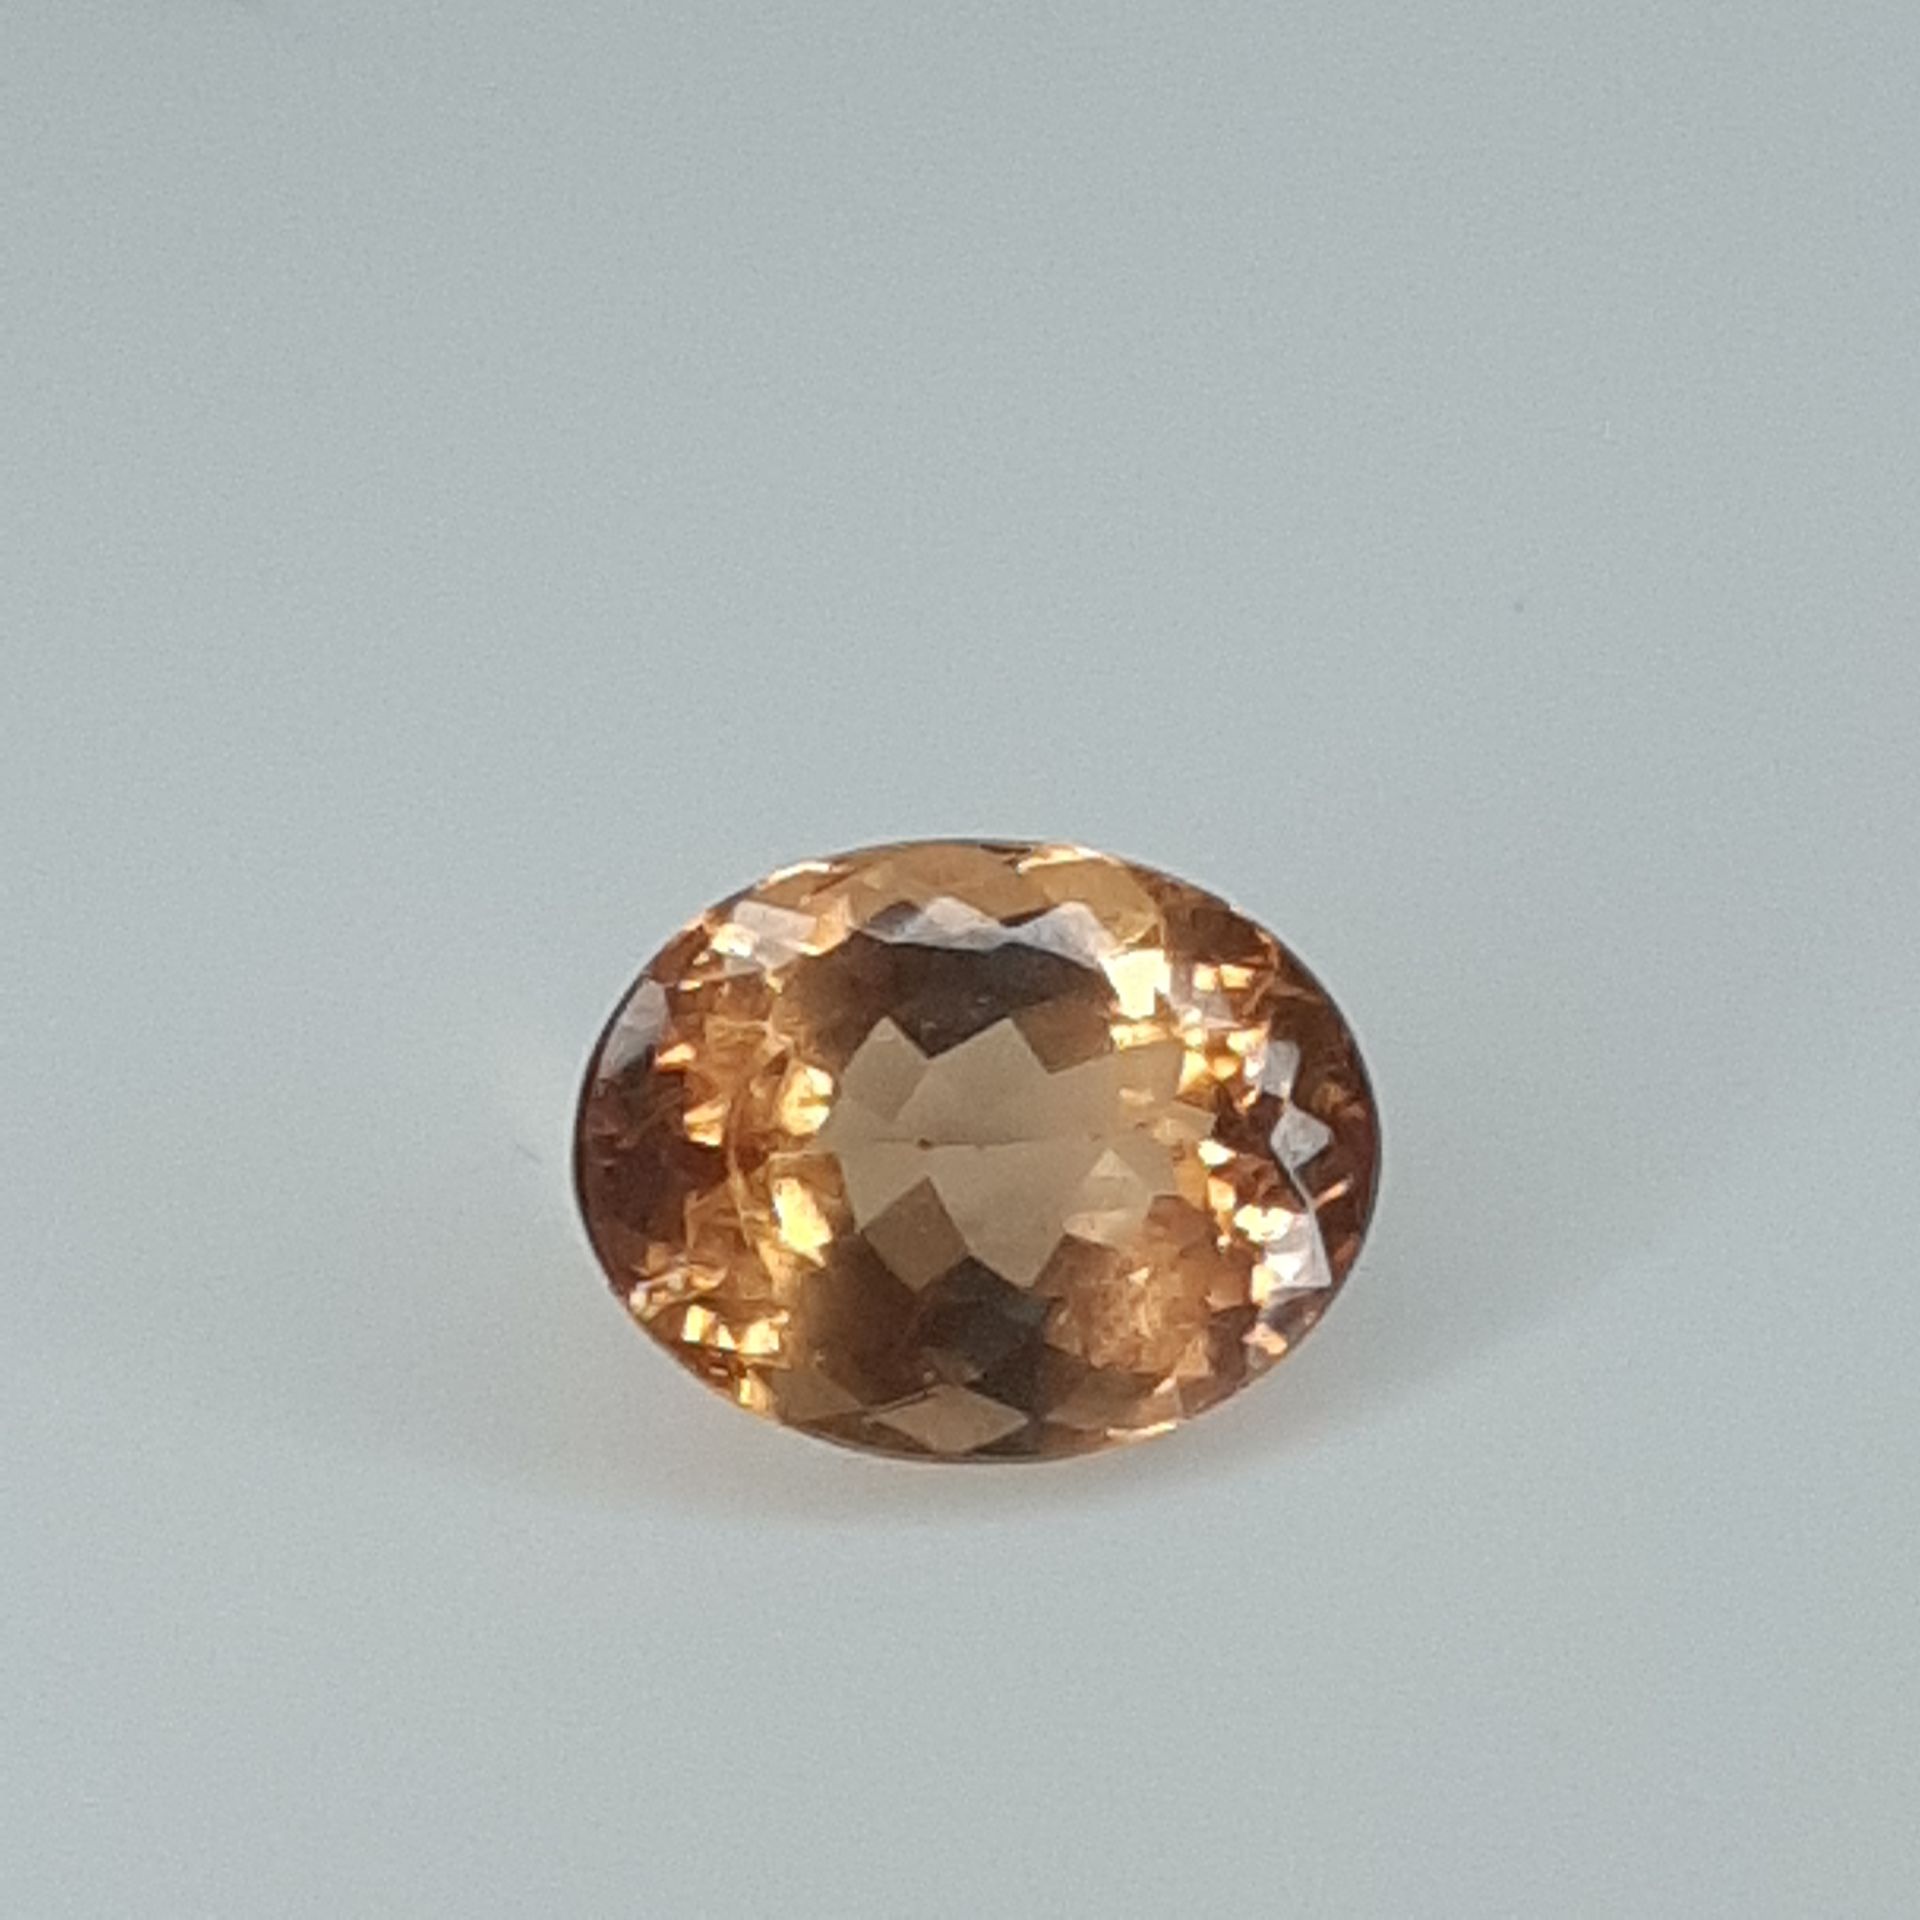 Topaze impériale - BRESIL - 4.65 cts IMPERIAL TOPAZE - From Brazil Ouro Preto - &hellip;